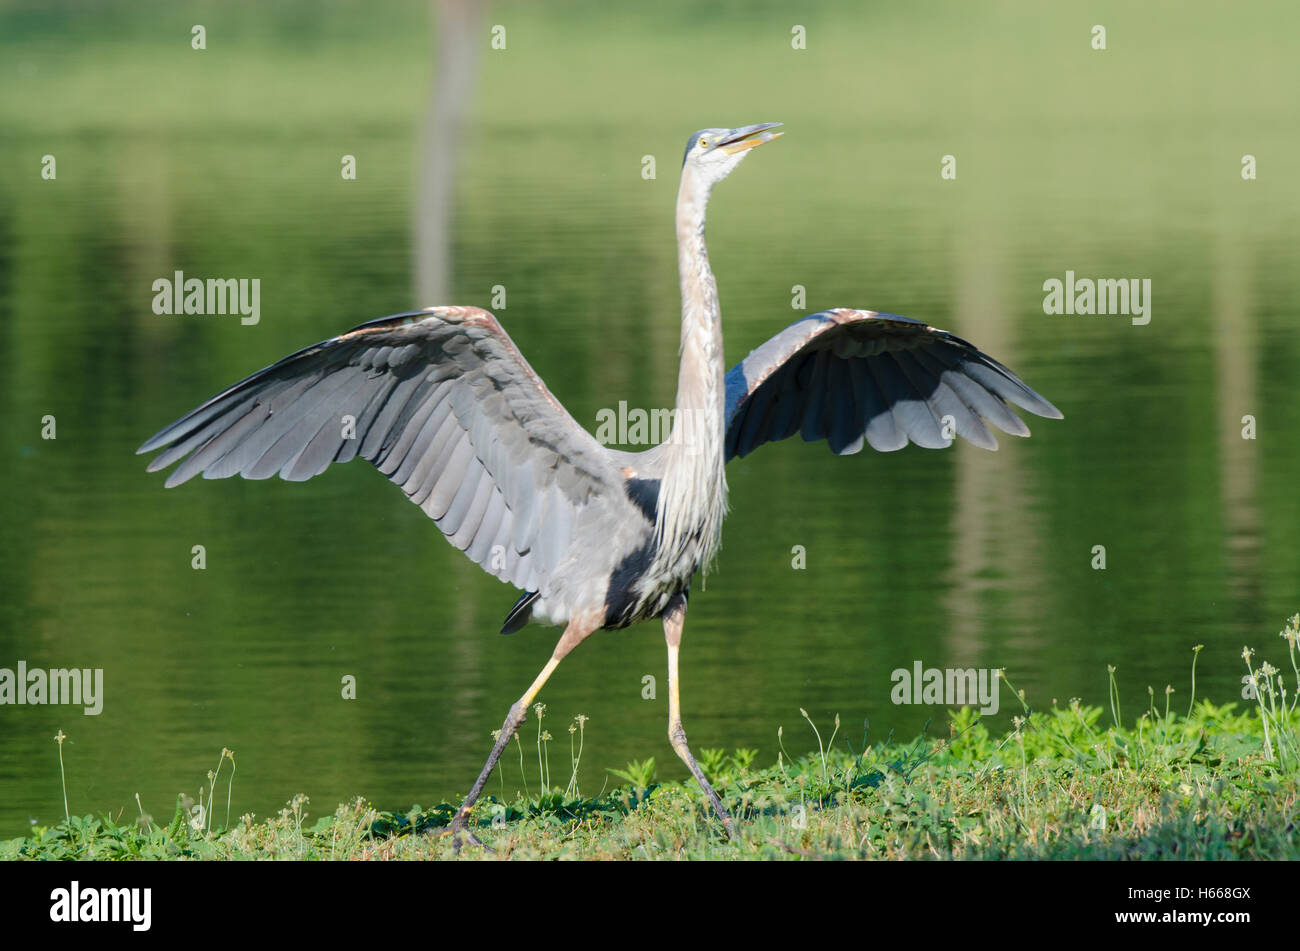 Great blue heron stretches its wings at Constitution Gardens in Washington DC. Stock Photo